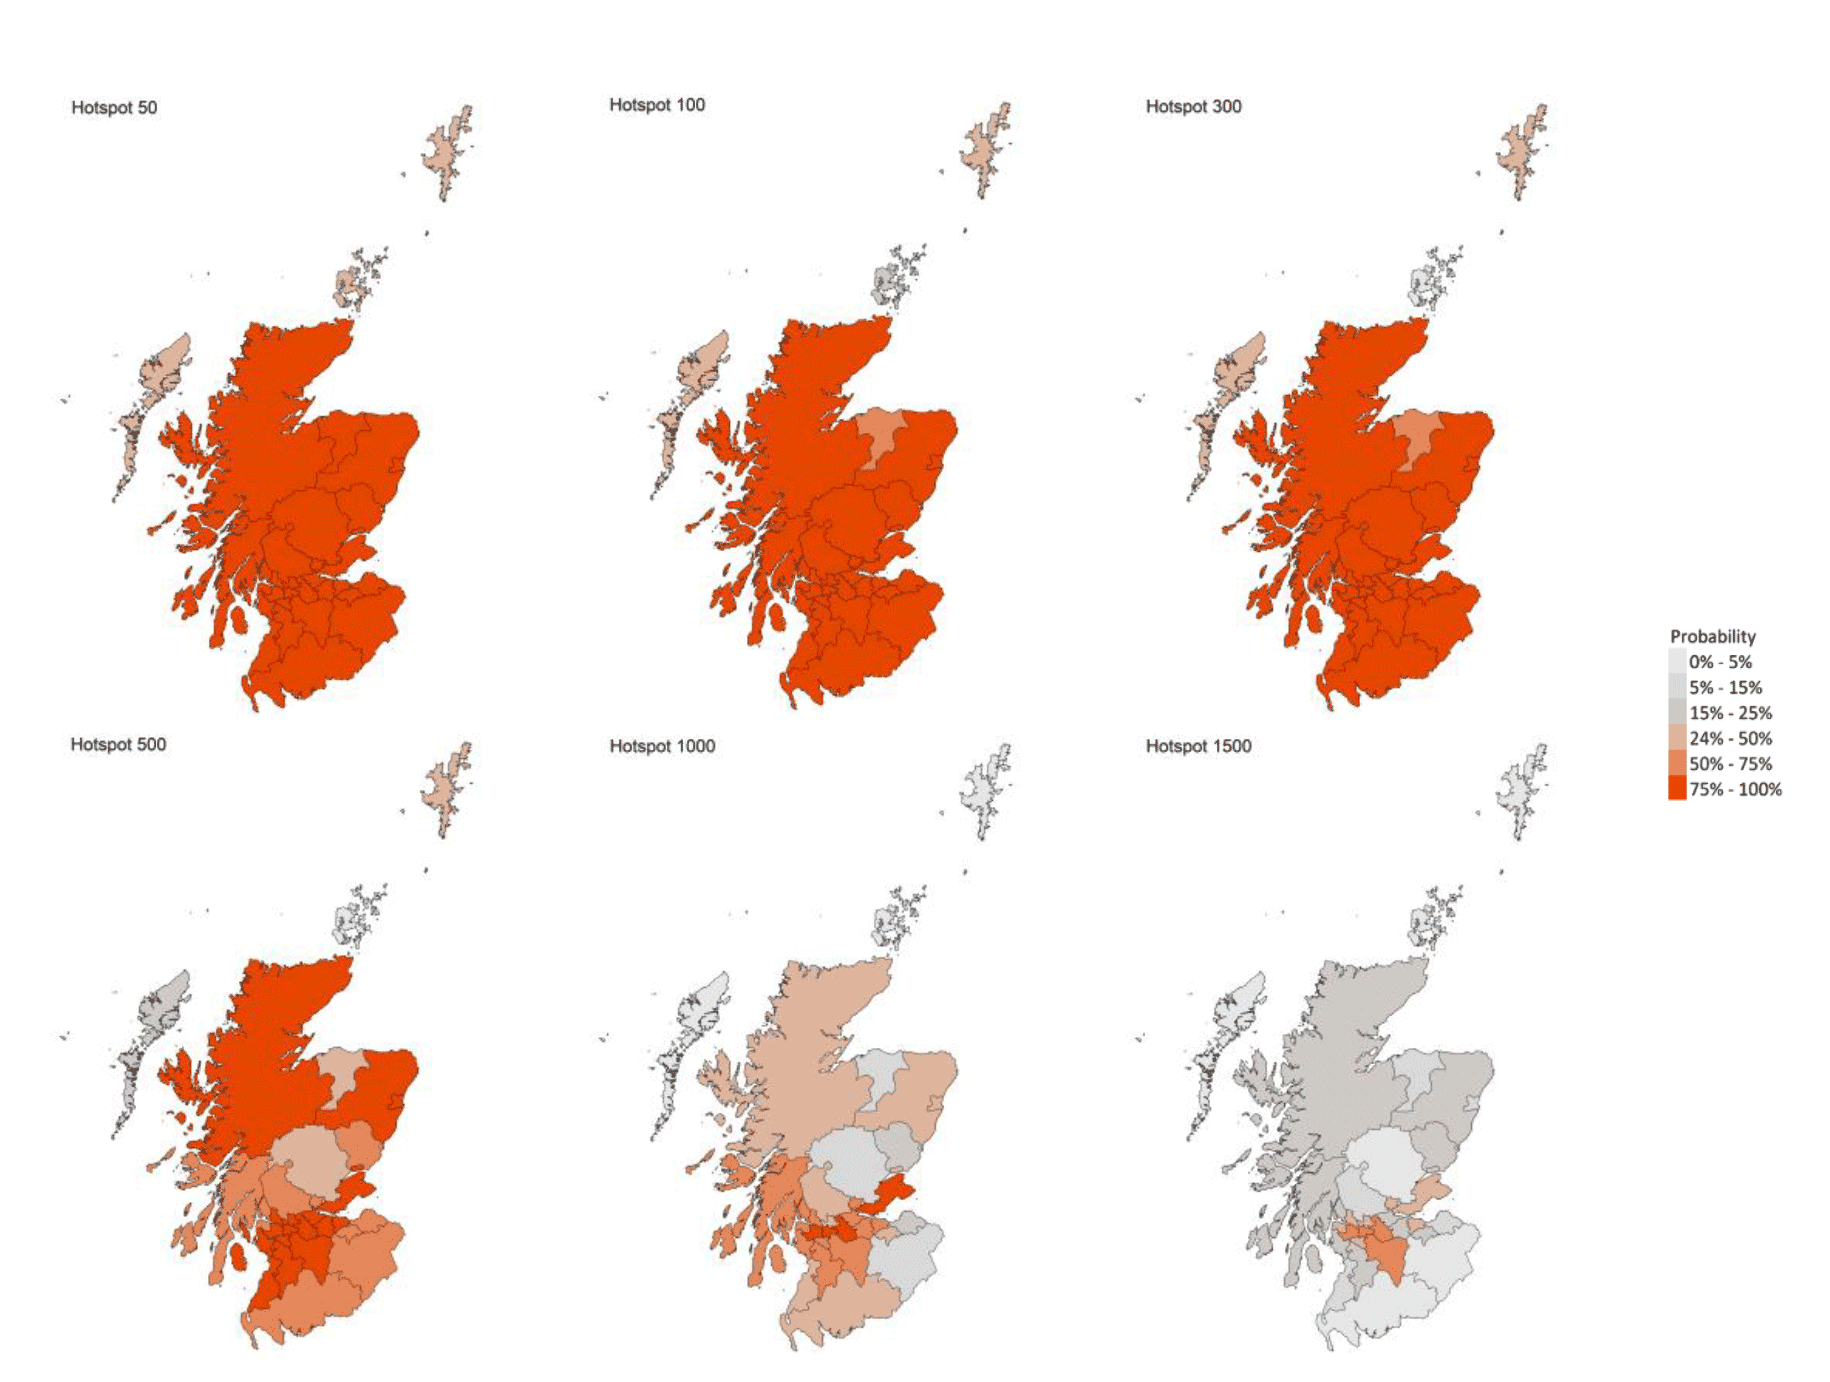 These six colour coded maps of Scotland show the probability of Local Authorities having more than 50, more than 100, more than 300, more than 500, more than 1,000 and more than 1,500 cases per 100,000 population. The colours range from very light grey for a 0 to 5 percent probability, through medium grey, dark grey, light orange, medium orange to dark orange for a 75 to 100 percent probability. 

These maps show that there are 29 local authorities that have at least a 75% probability of exceeding 50 cases per 100,000 population. Of those, 18 are expected to exceed 500 cases per 100,000 with at least a 75% probability. These are Aberdeen City, Aberdeenshire, City of Edinburgh, Dundee City, East Ayrshire, East Dunbartonshire, East Renfrewshire, Falkirk, Fife, Glasgow City, Highland, North Ayrshire, North Lanarkshire, Renfrewshire, South Ayrshire, South Lanarkshire, West Dunbartonshire and West Lothian. Four local authorities are expected to exceed 1,000 cases per 100,000 with a 75% probability. These are Fife, Glasgow City, North Lanarkshire and Renfrewshire.
